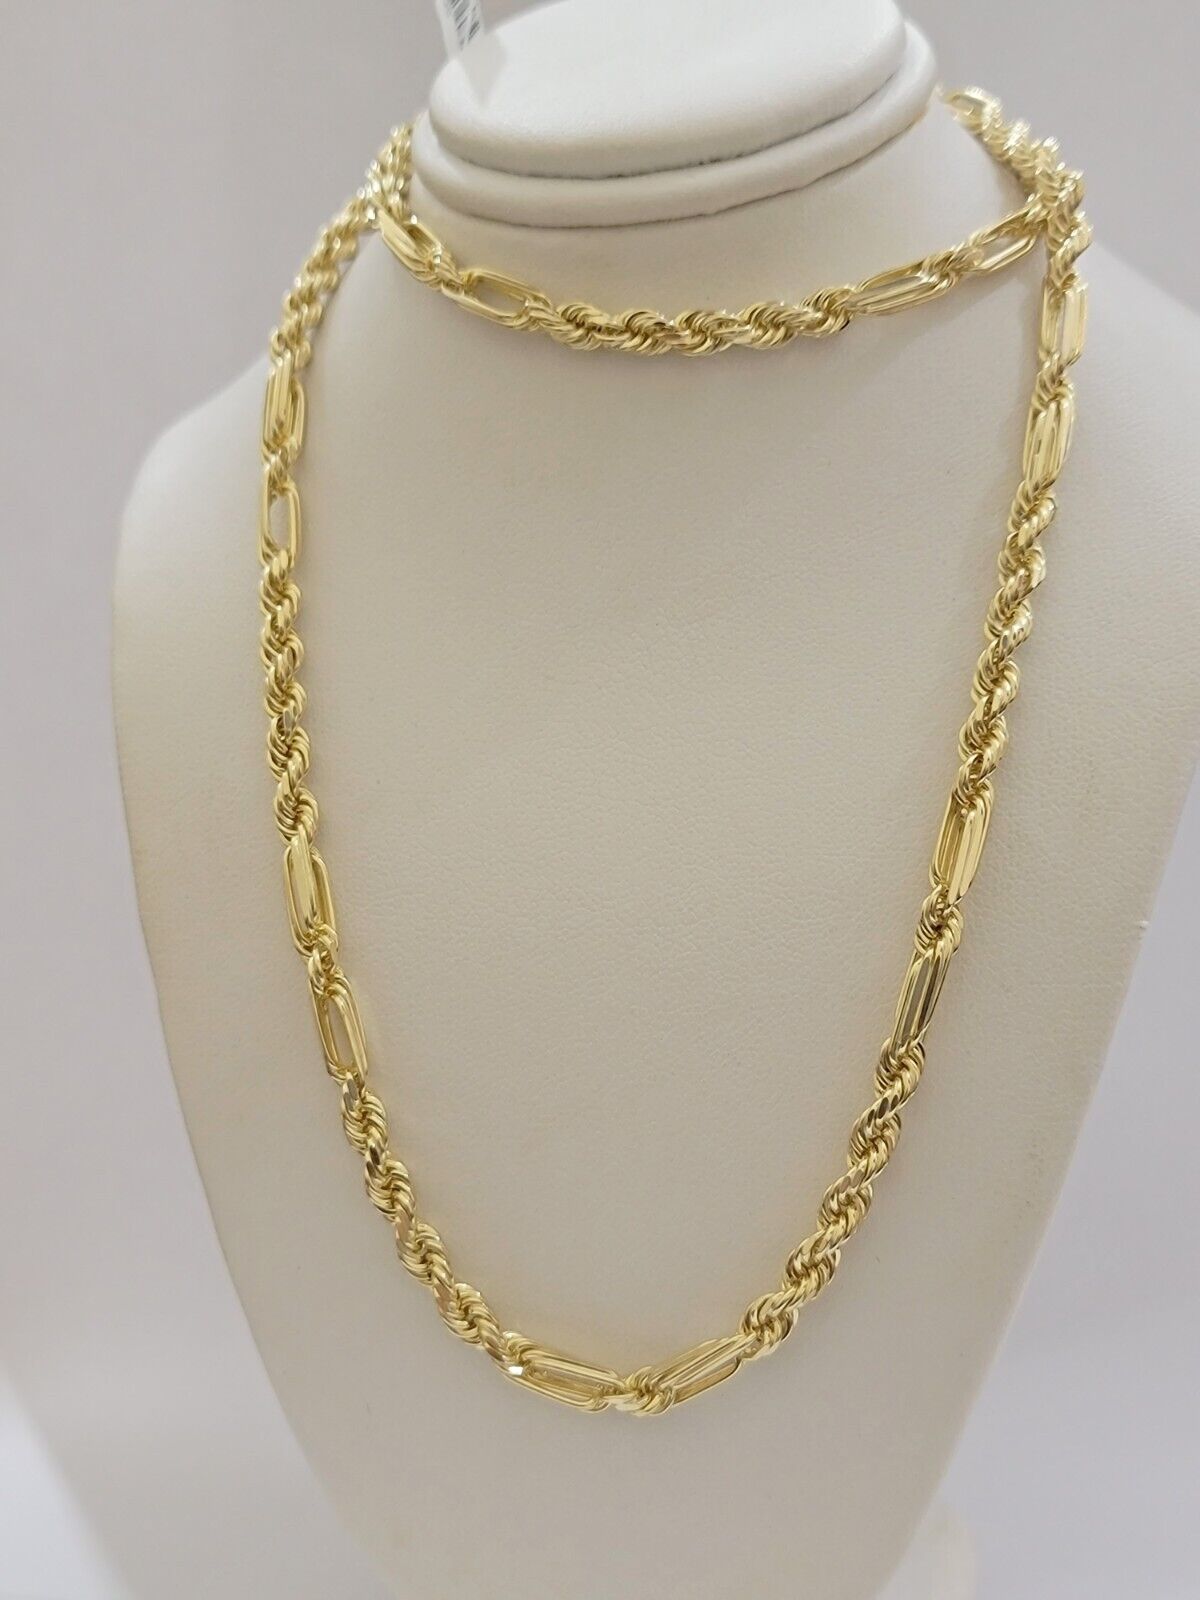 Solid 10k Gold Milano Rope Chain Necklace 20